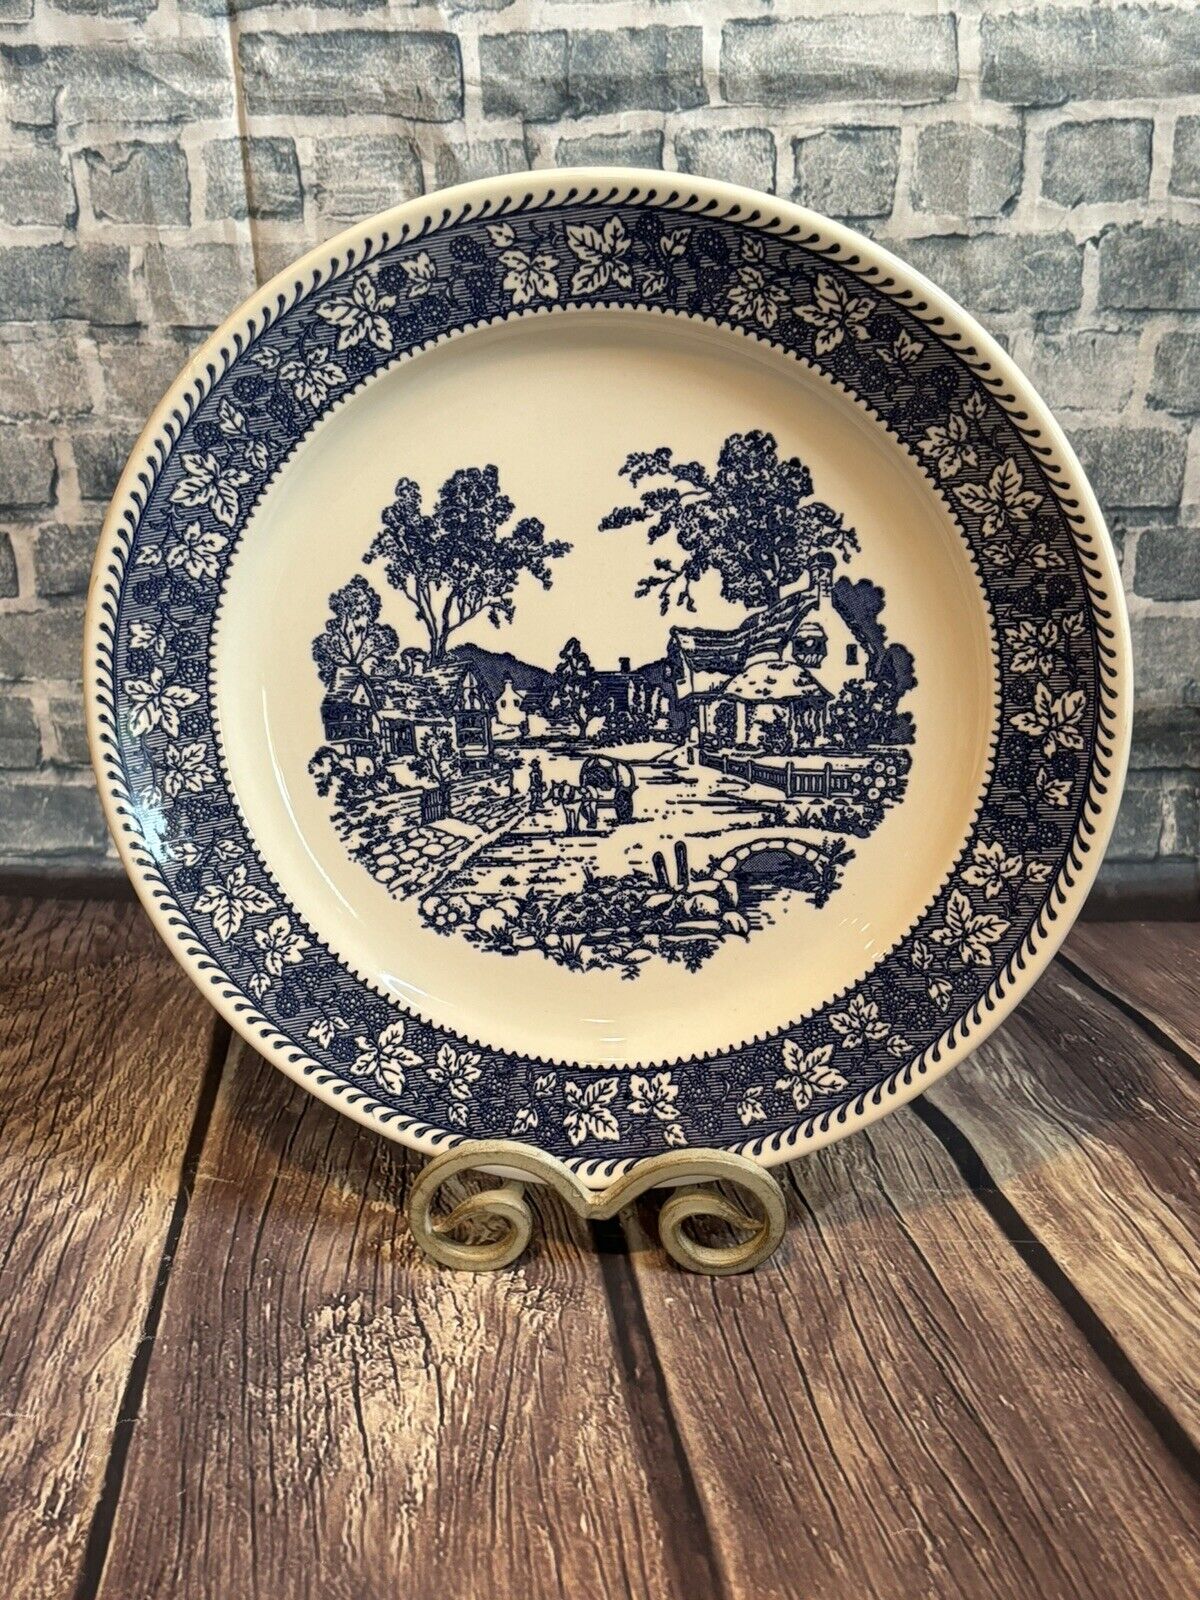 Antique Early Americana Design Charger Plate, Blue, White, Horse Drawn Carriage,